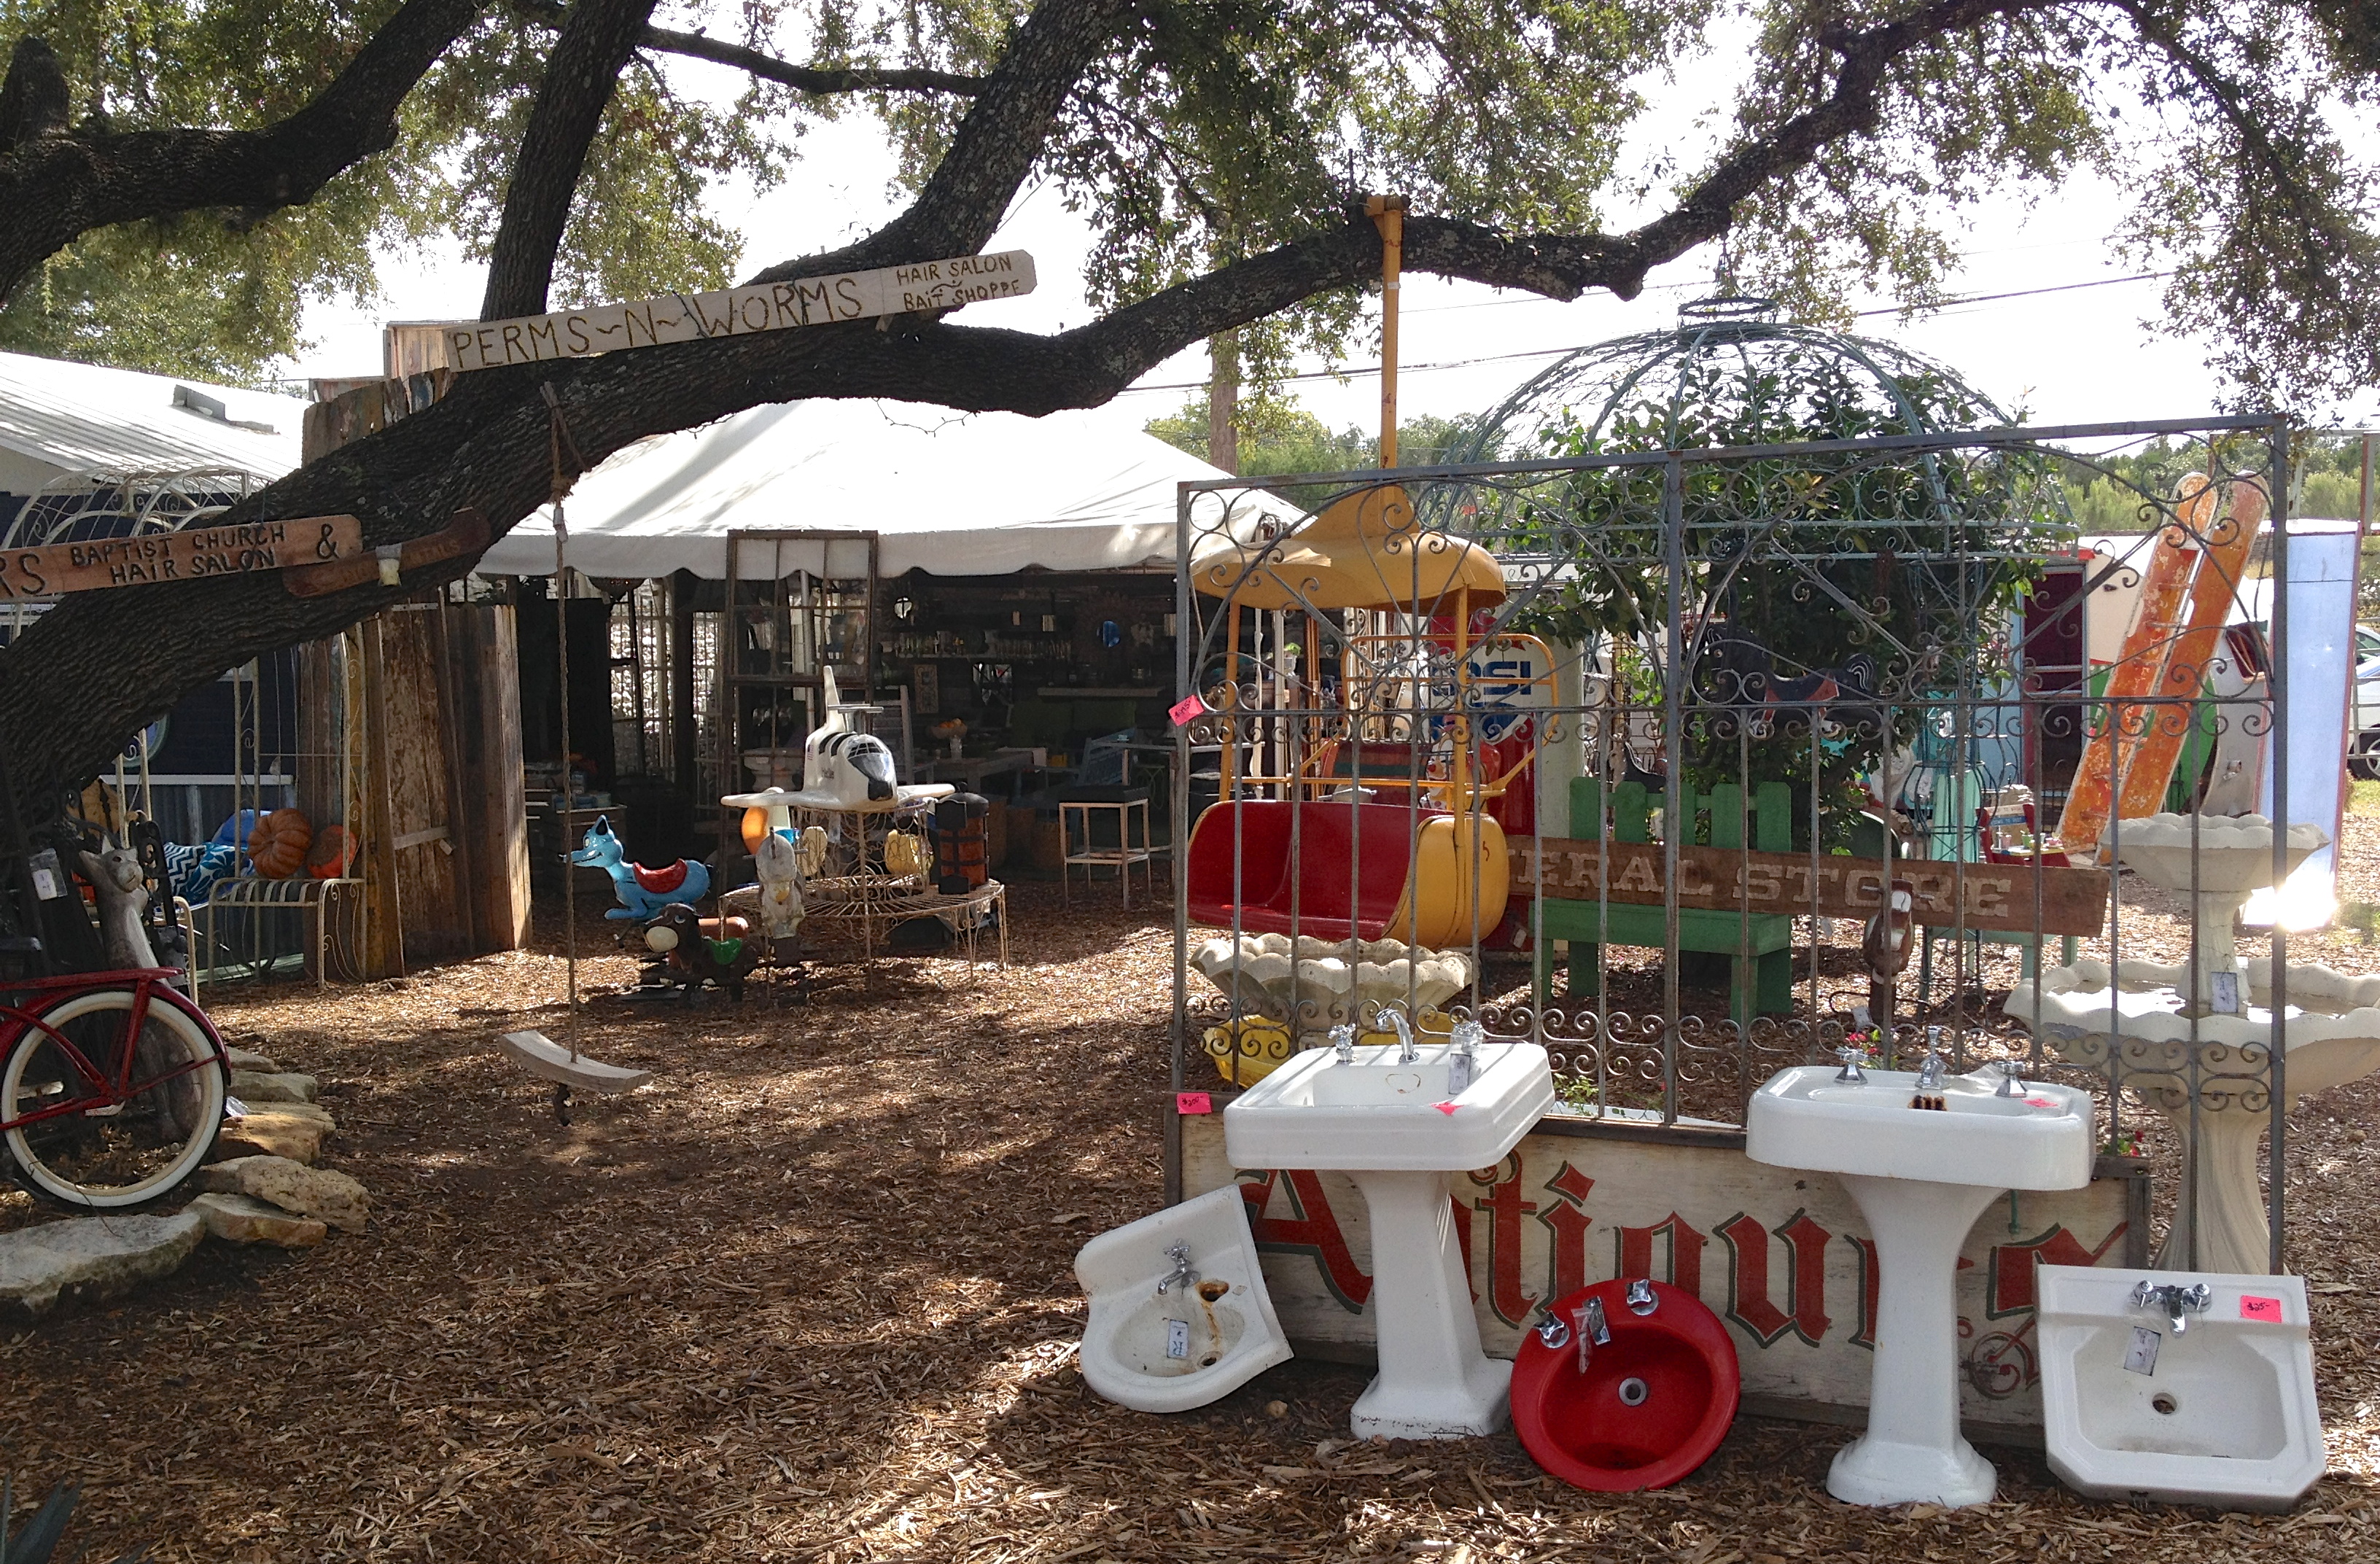 Lake Travis Area Shopping: Revival in Bee Cave